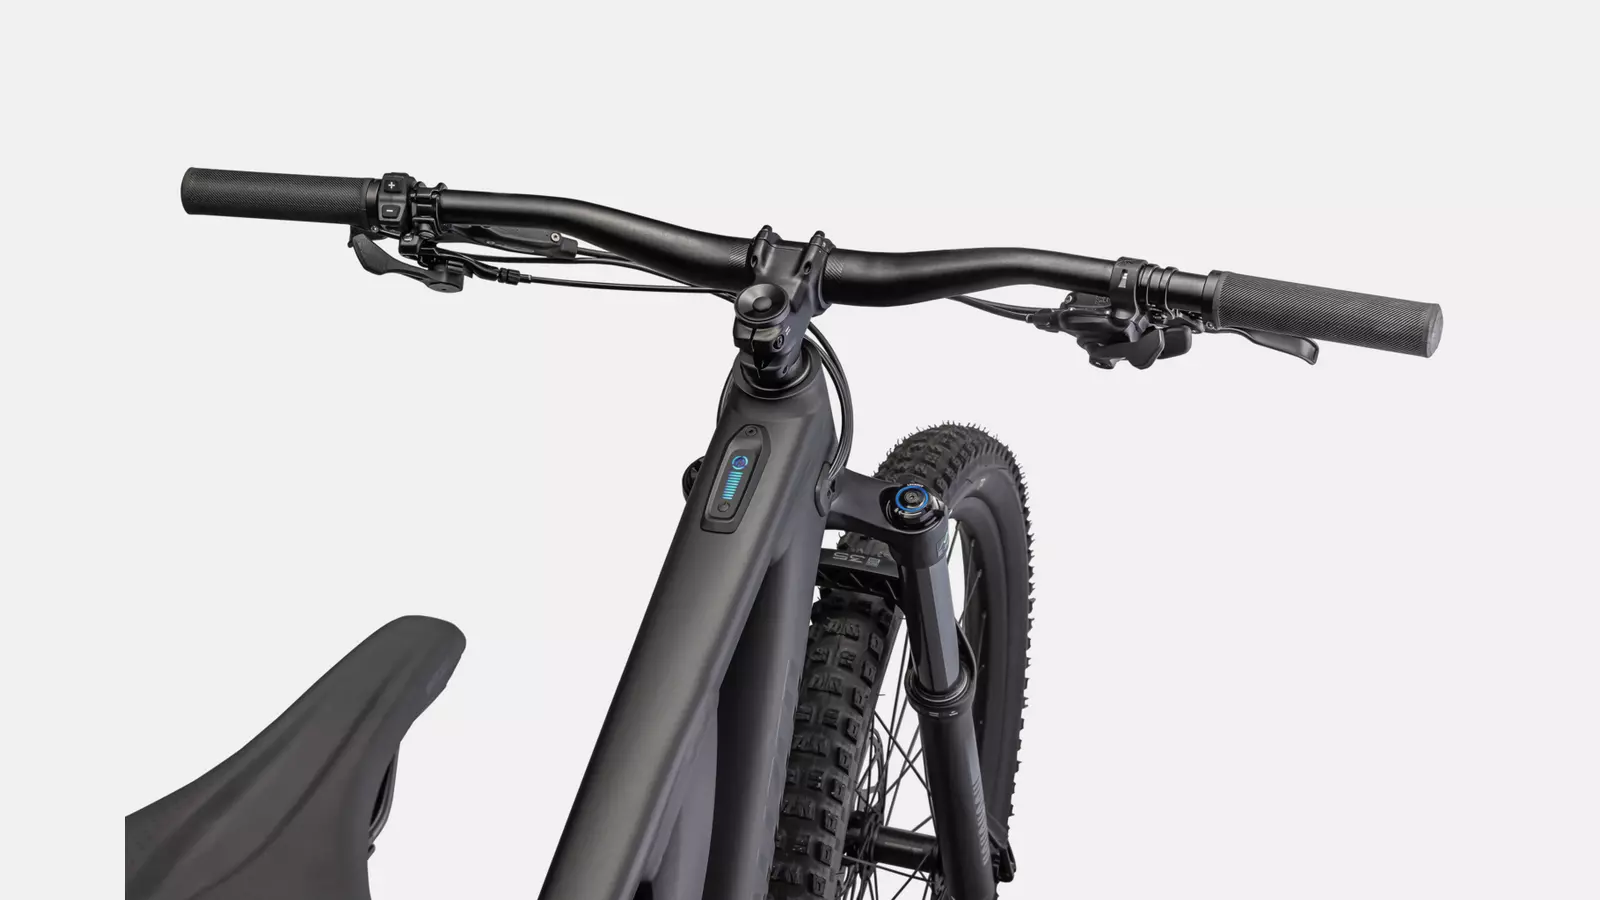 Simon Stewart reviews the Specialized Turbo Levo for Blister